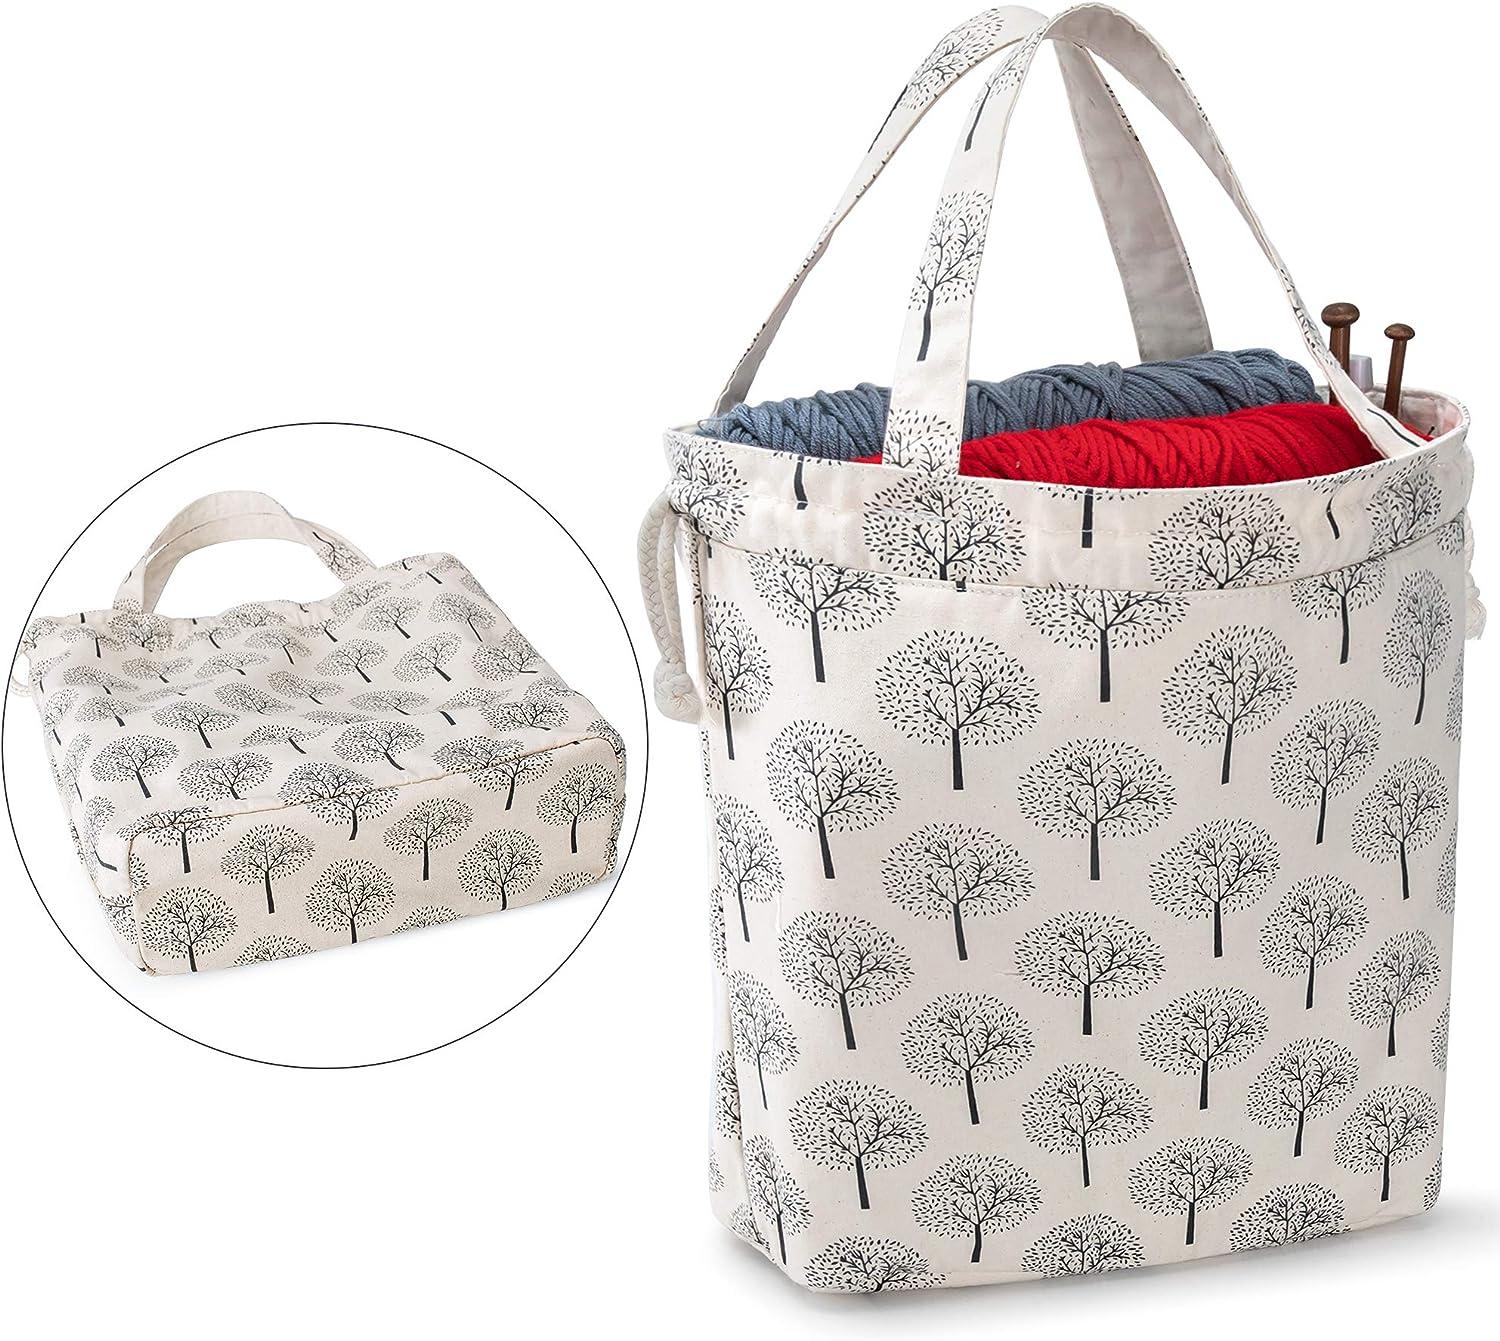  Teamoy Knitting Bag, Yarn Storage Tote Bag with Inner Divider  for Yarn and Unfinished Project (Large with Cover, Gray)